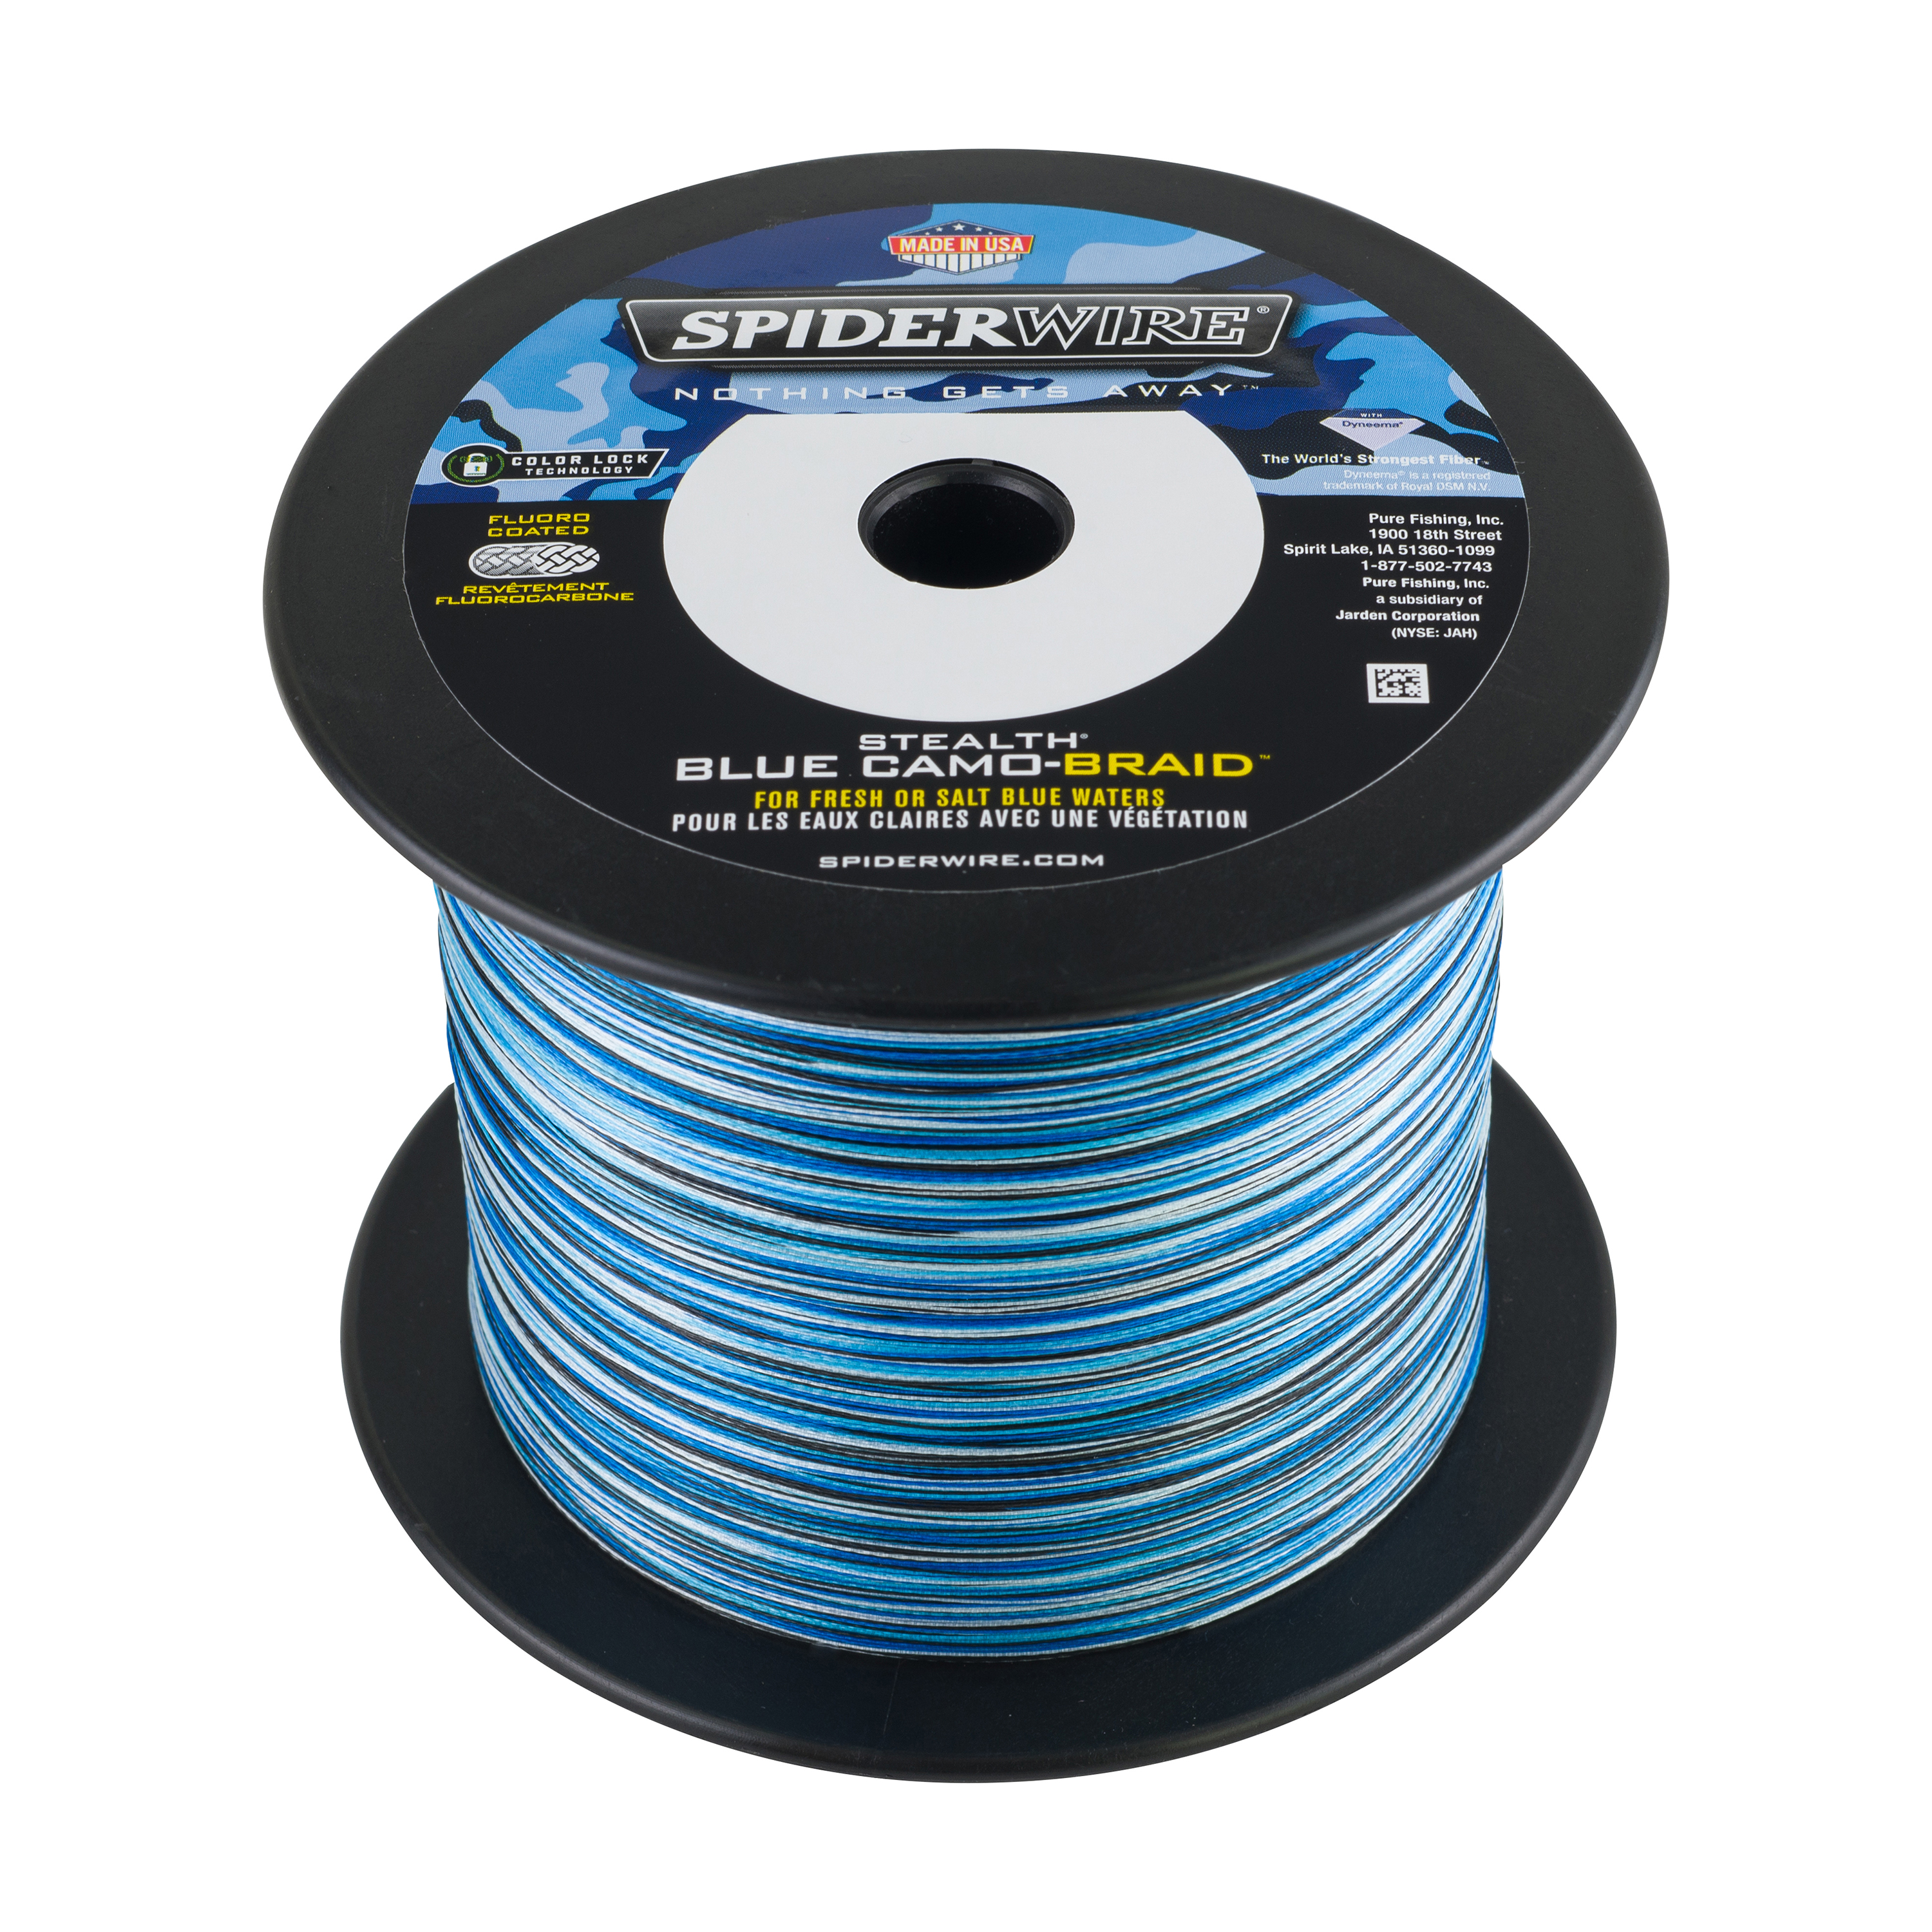 https://op1.0ps.us/original/opplanet-spiderwire-ss30bc-3000-stealth-camoblue-30lb-3000yd-1370465